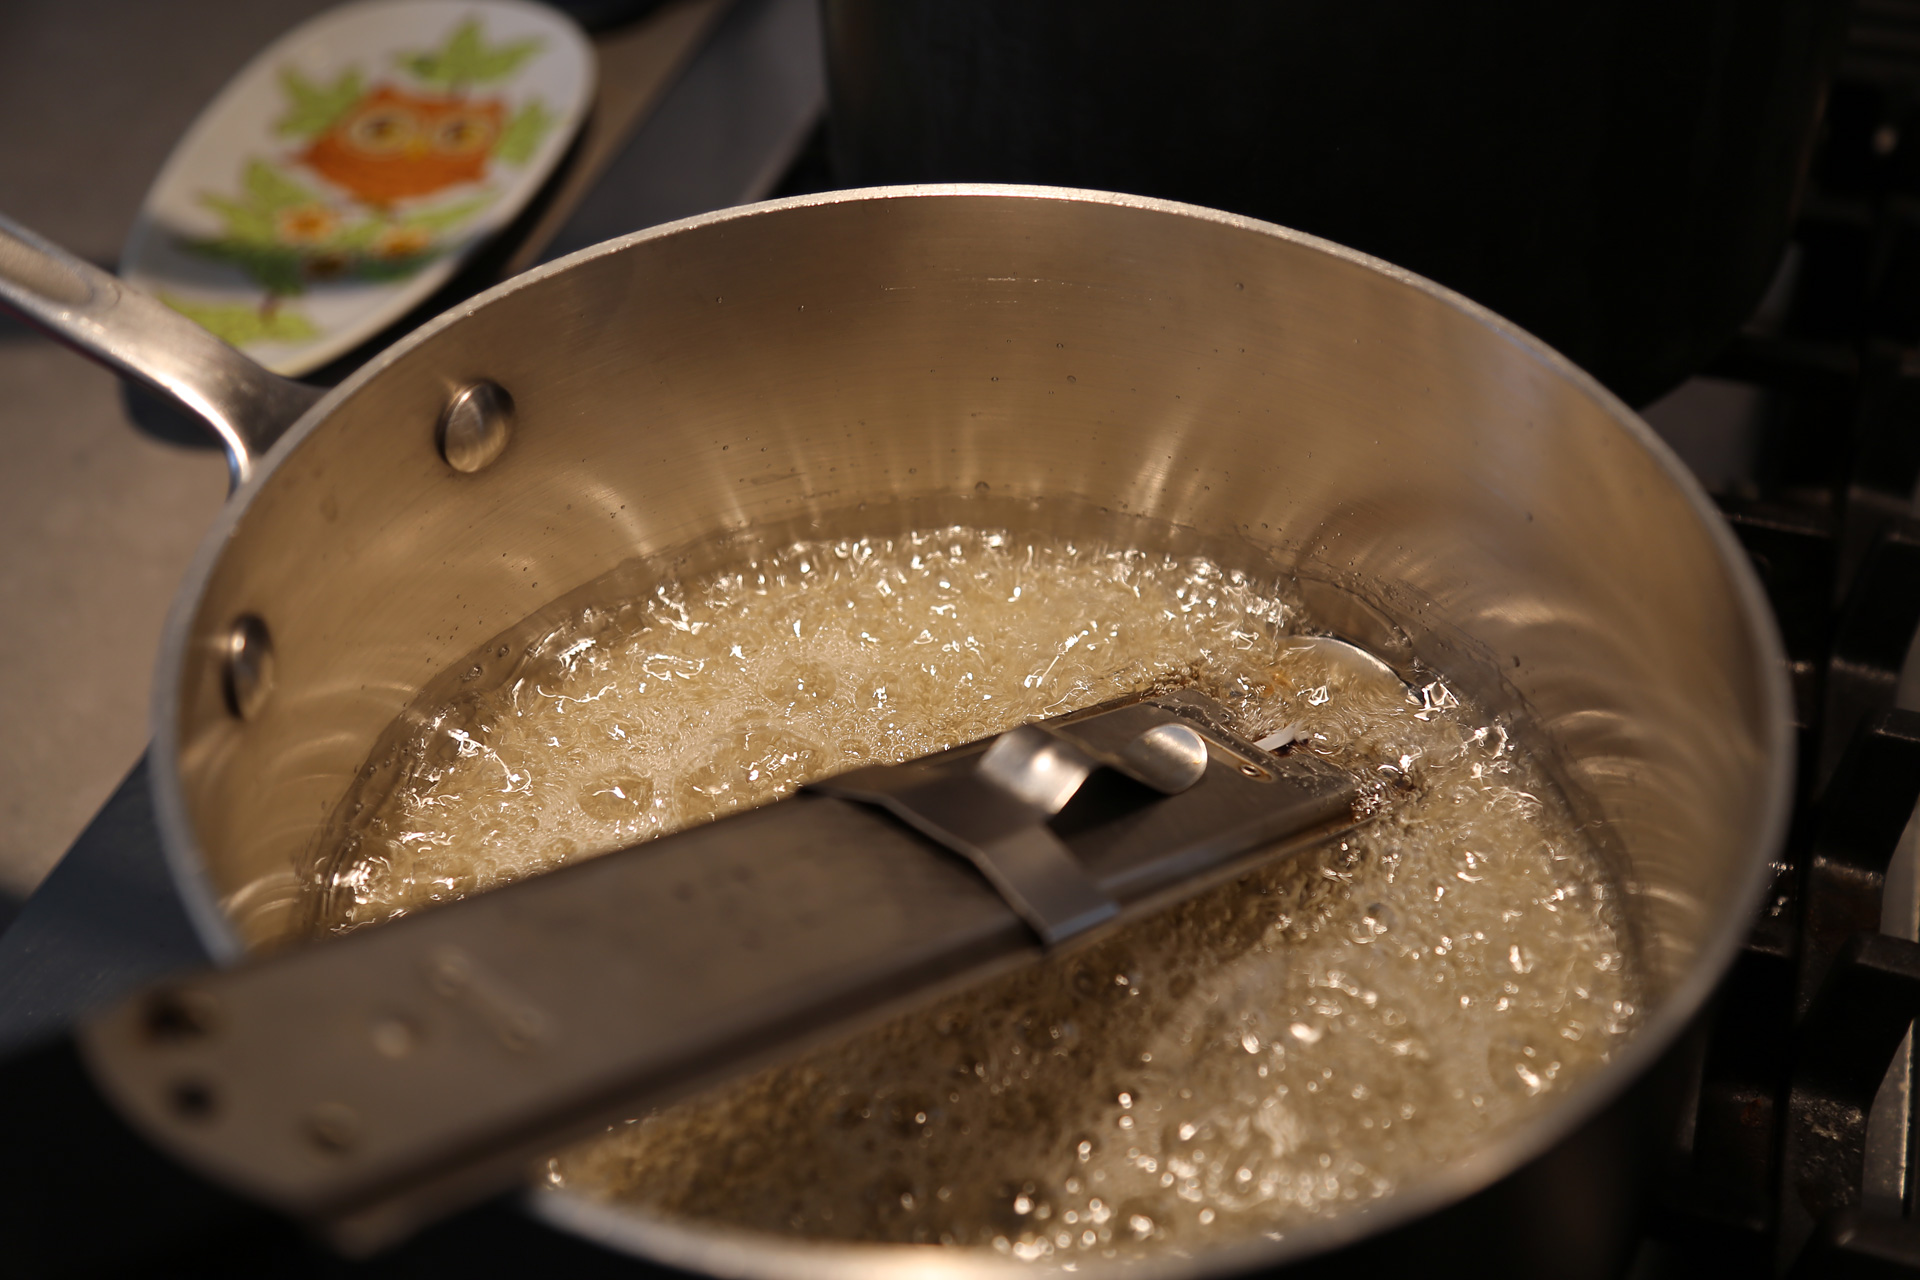 Bring to a boil over high heat, swirling the pan occasionally but not stirring, until the mixture reads 245°F on a candy thermometer. 